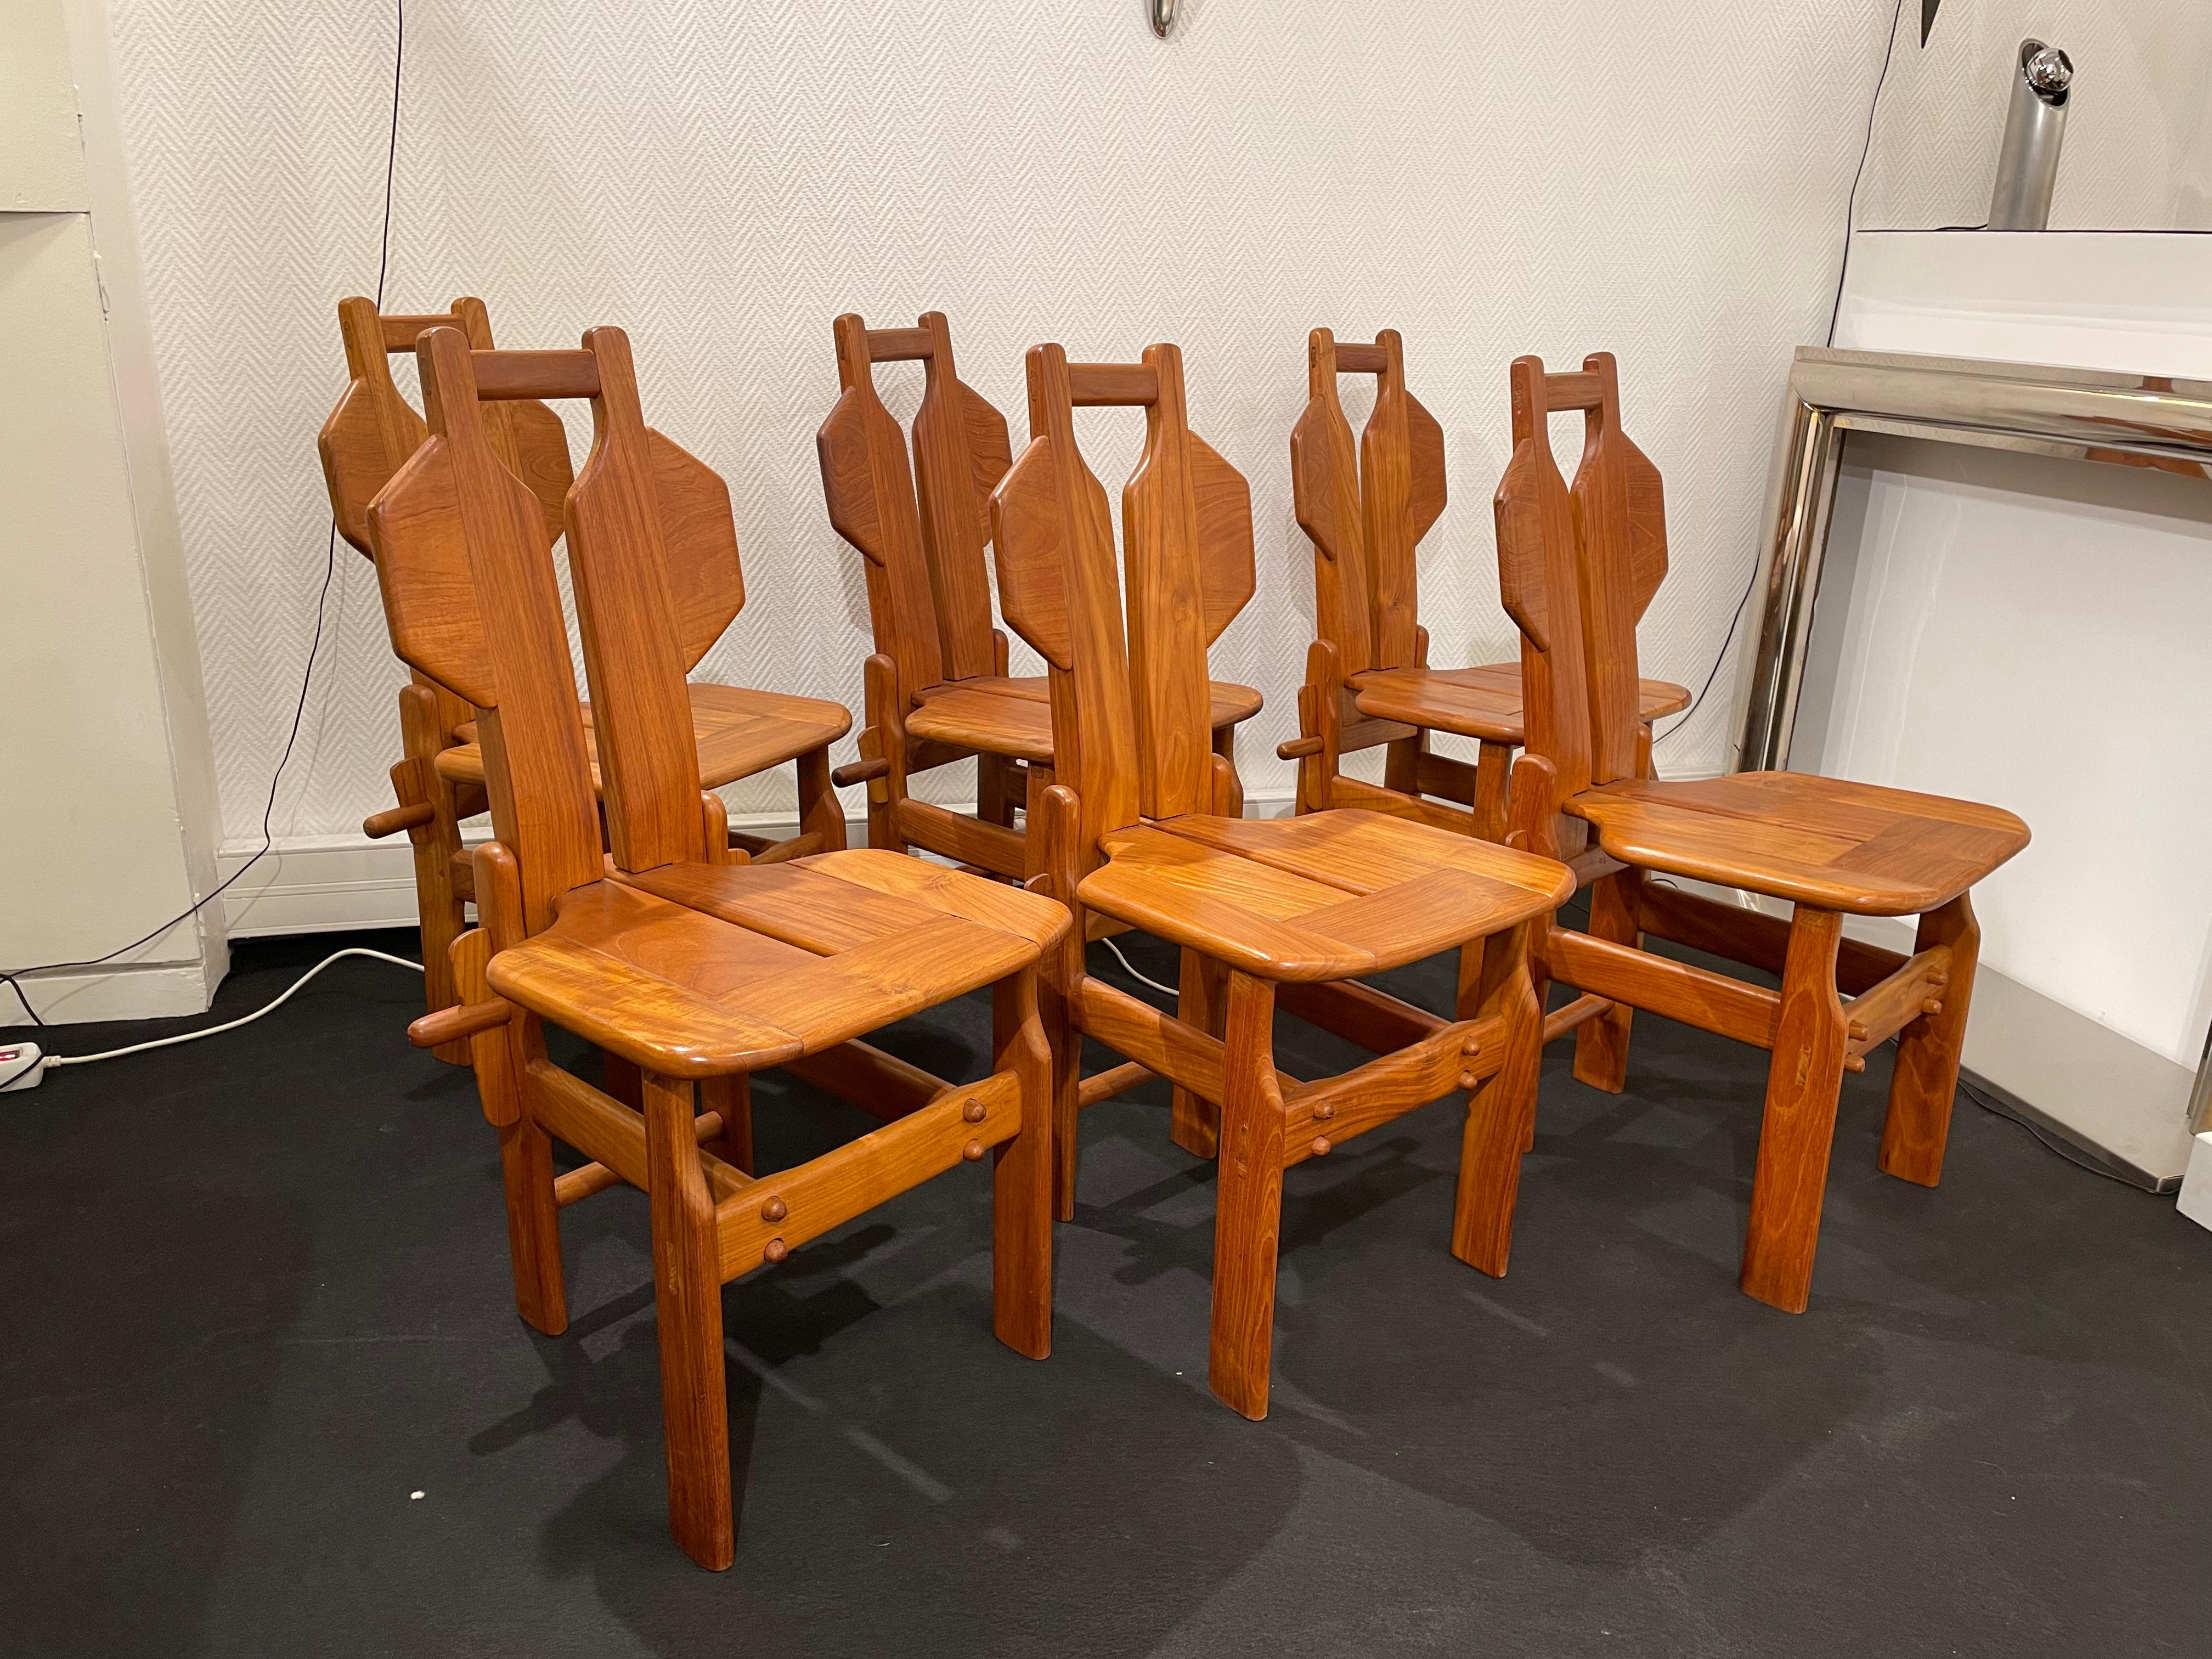 6 elm sculpture chairs
From 1970.